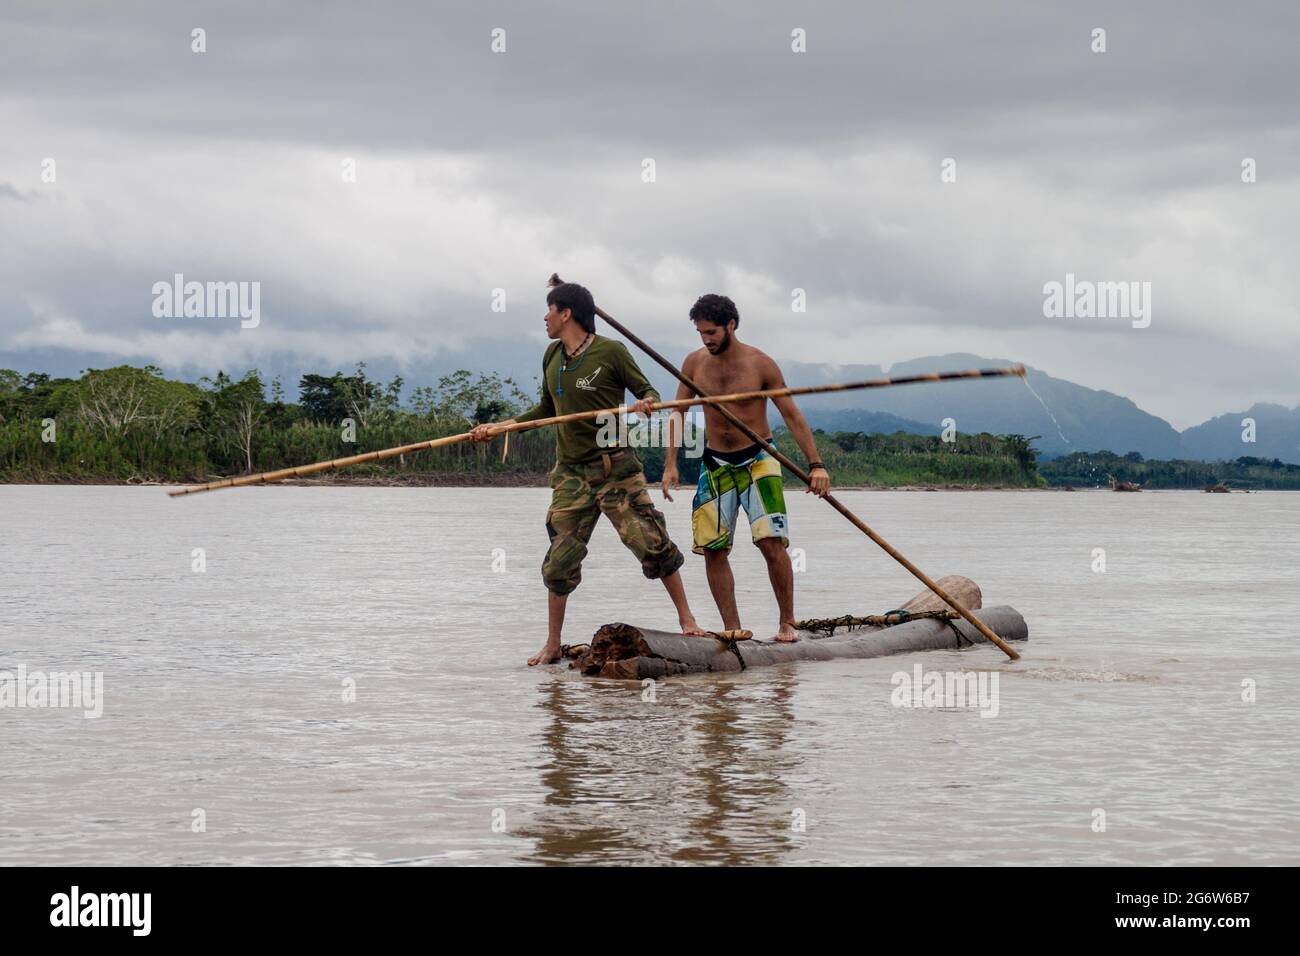 MADIDI, BOLIVIA - MAY 7, 2105: Tourist with a tour guide on Beni river in Madidi National Park, Bolivia Stock Photo